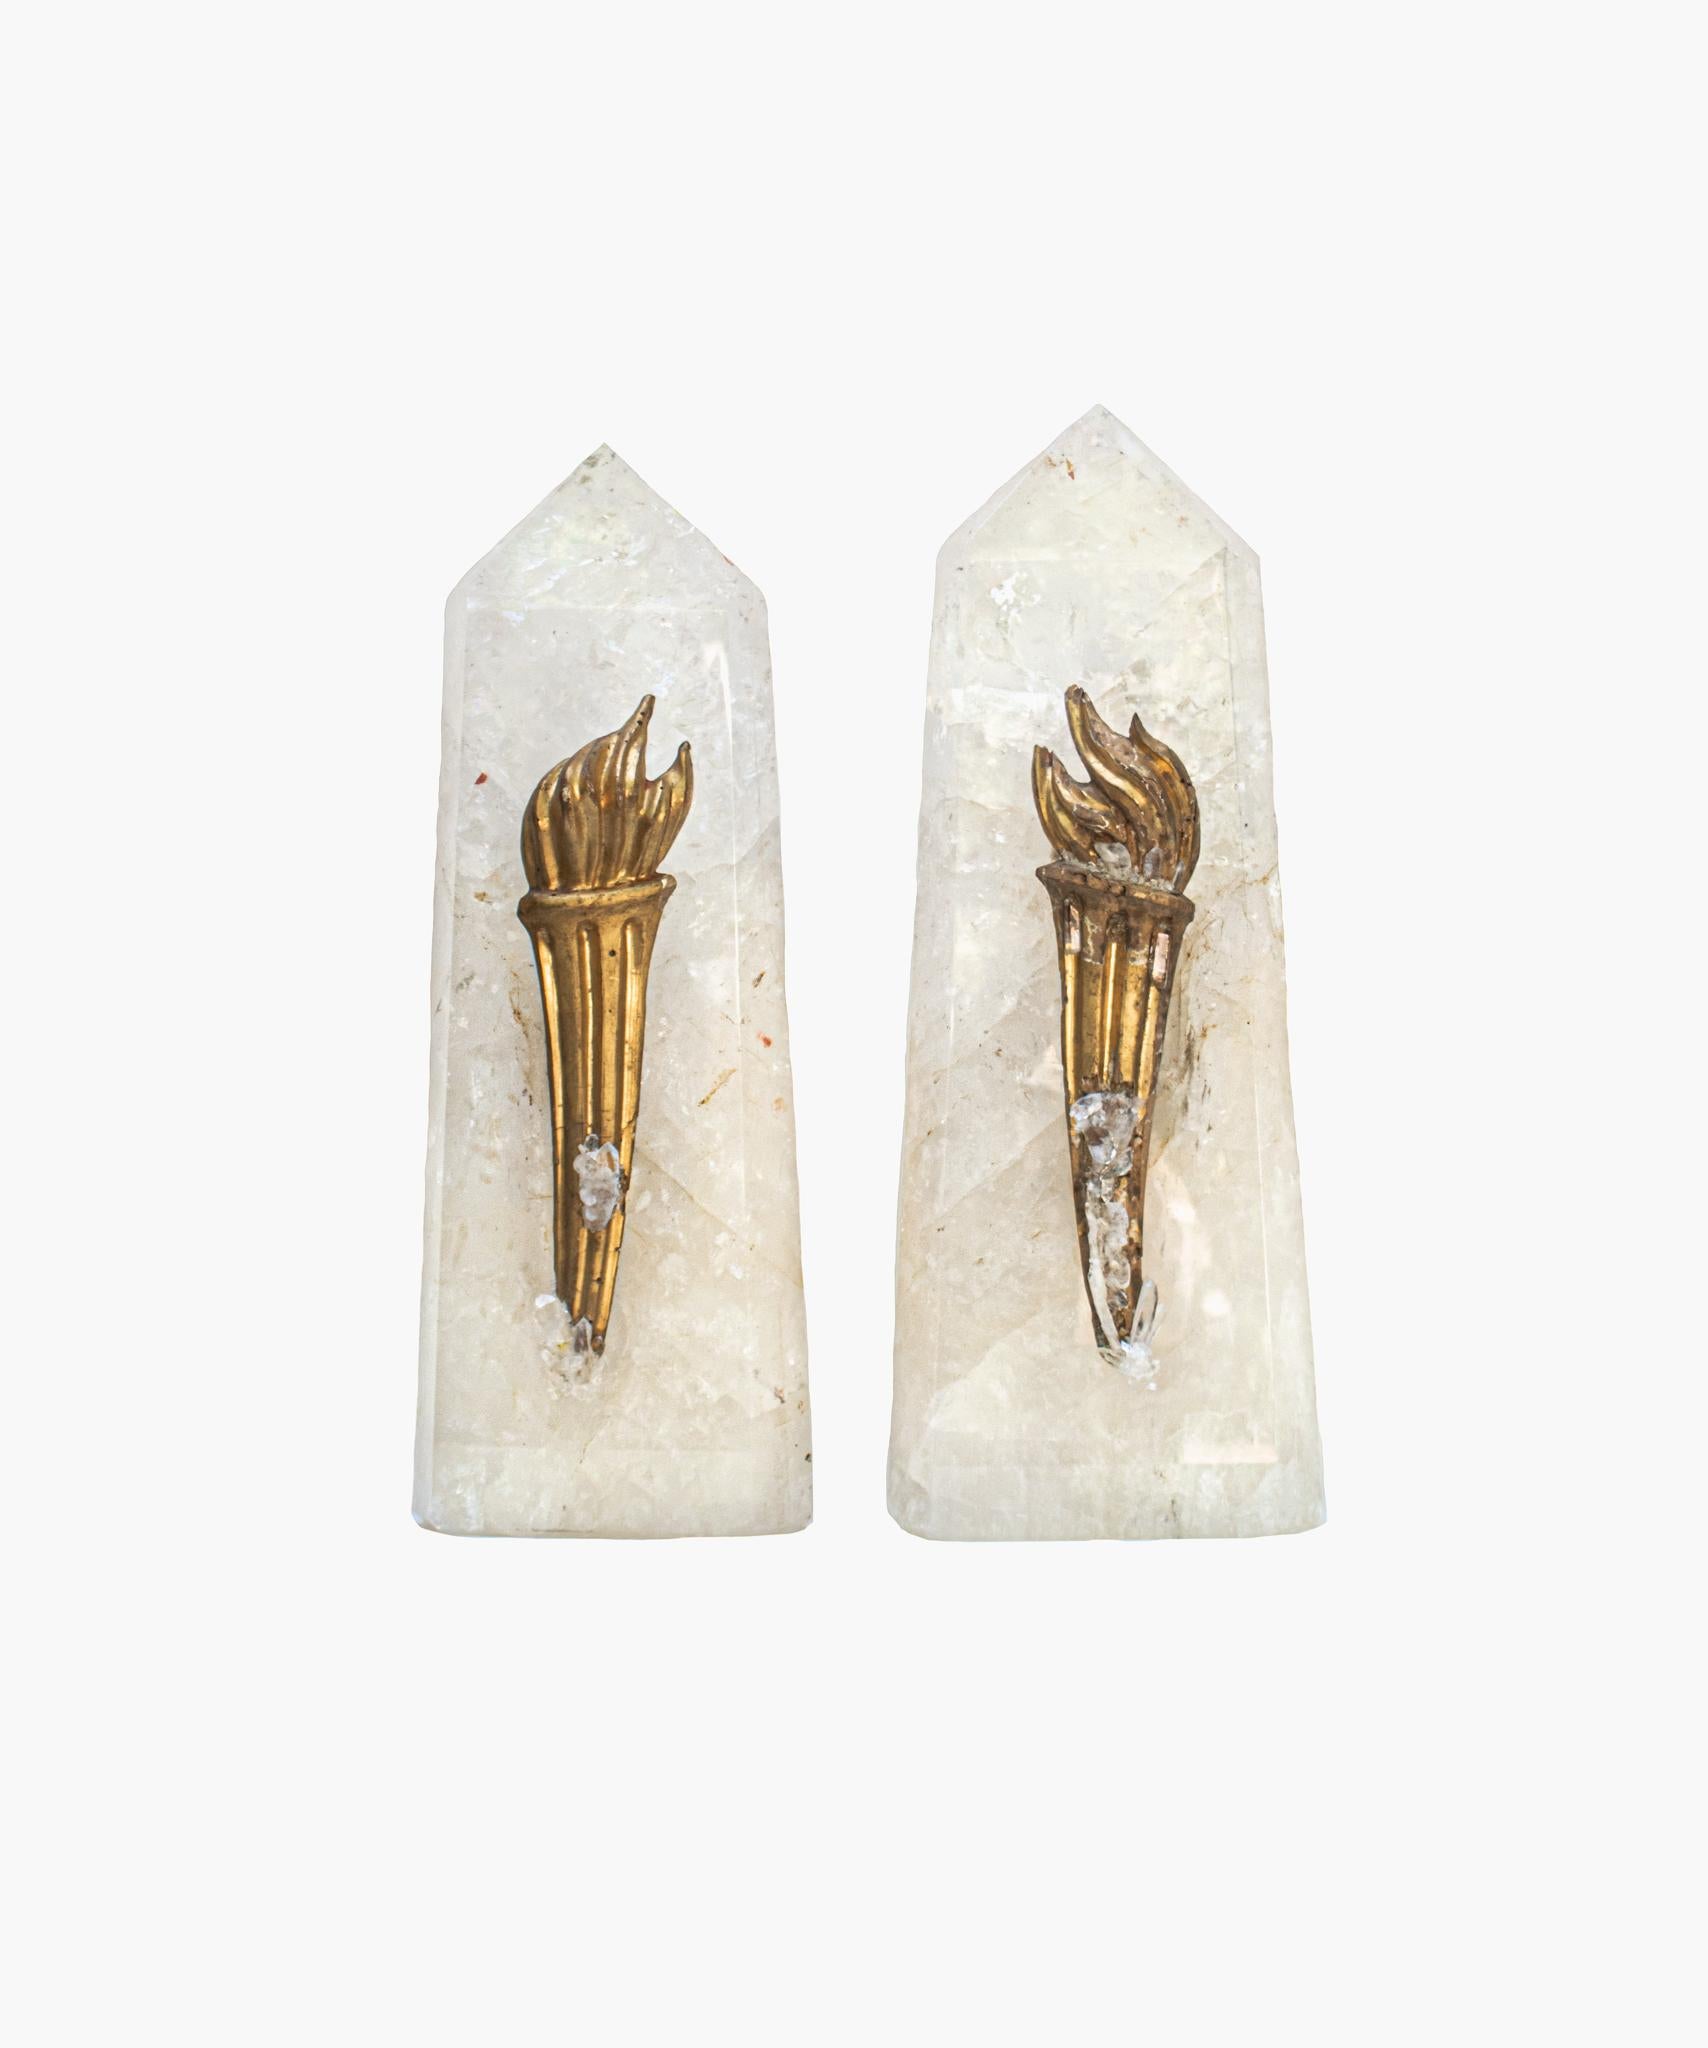 Pair of polished oblique quartz crystal points with matching 18th century Italian gold leaf torch fragments decorated with crystal quartz points and faden crystals. The 18th century torch fragments originally came from a church in Tuscany. They are